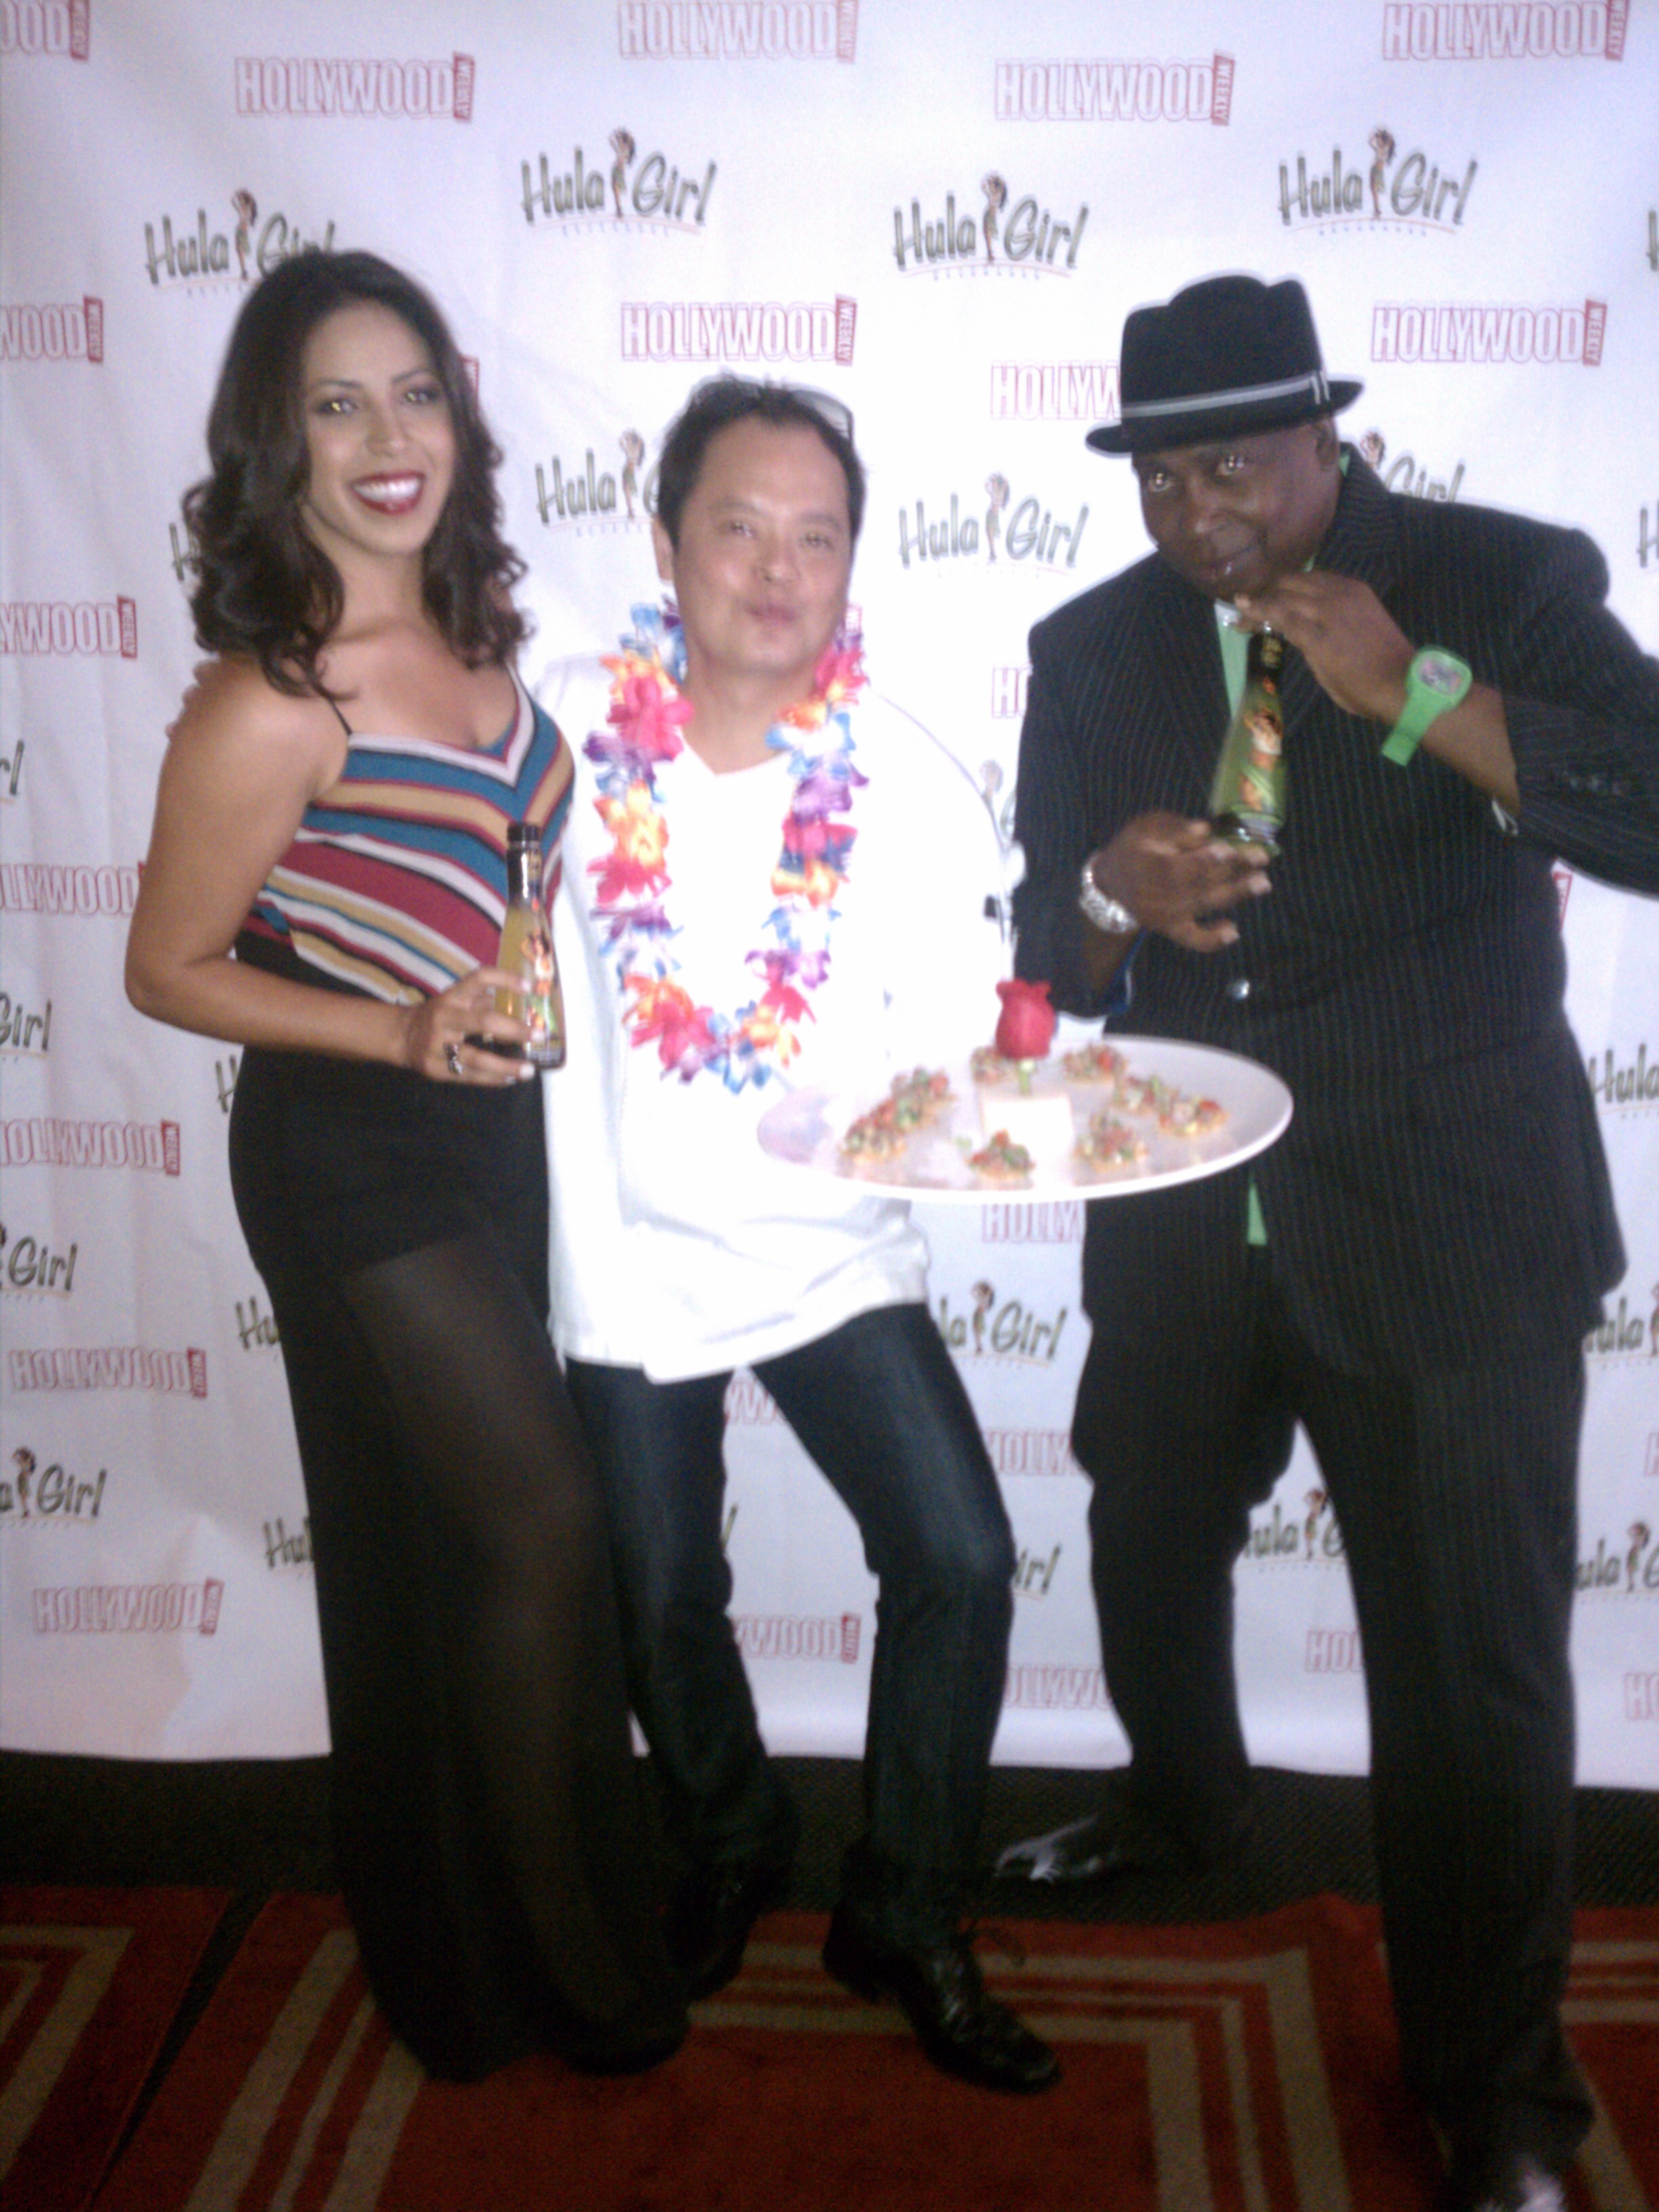 From left to right, Rosemary Lopez, the official Hula Girl, Chef Jack Lee and Hula Girl's brand ambassador, BJ Drake pose on the red carpet with sushi and Hula Girl products 